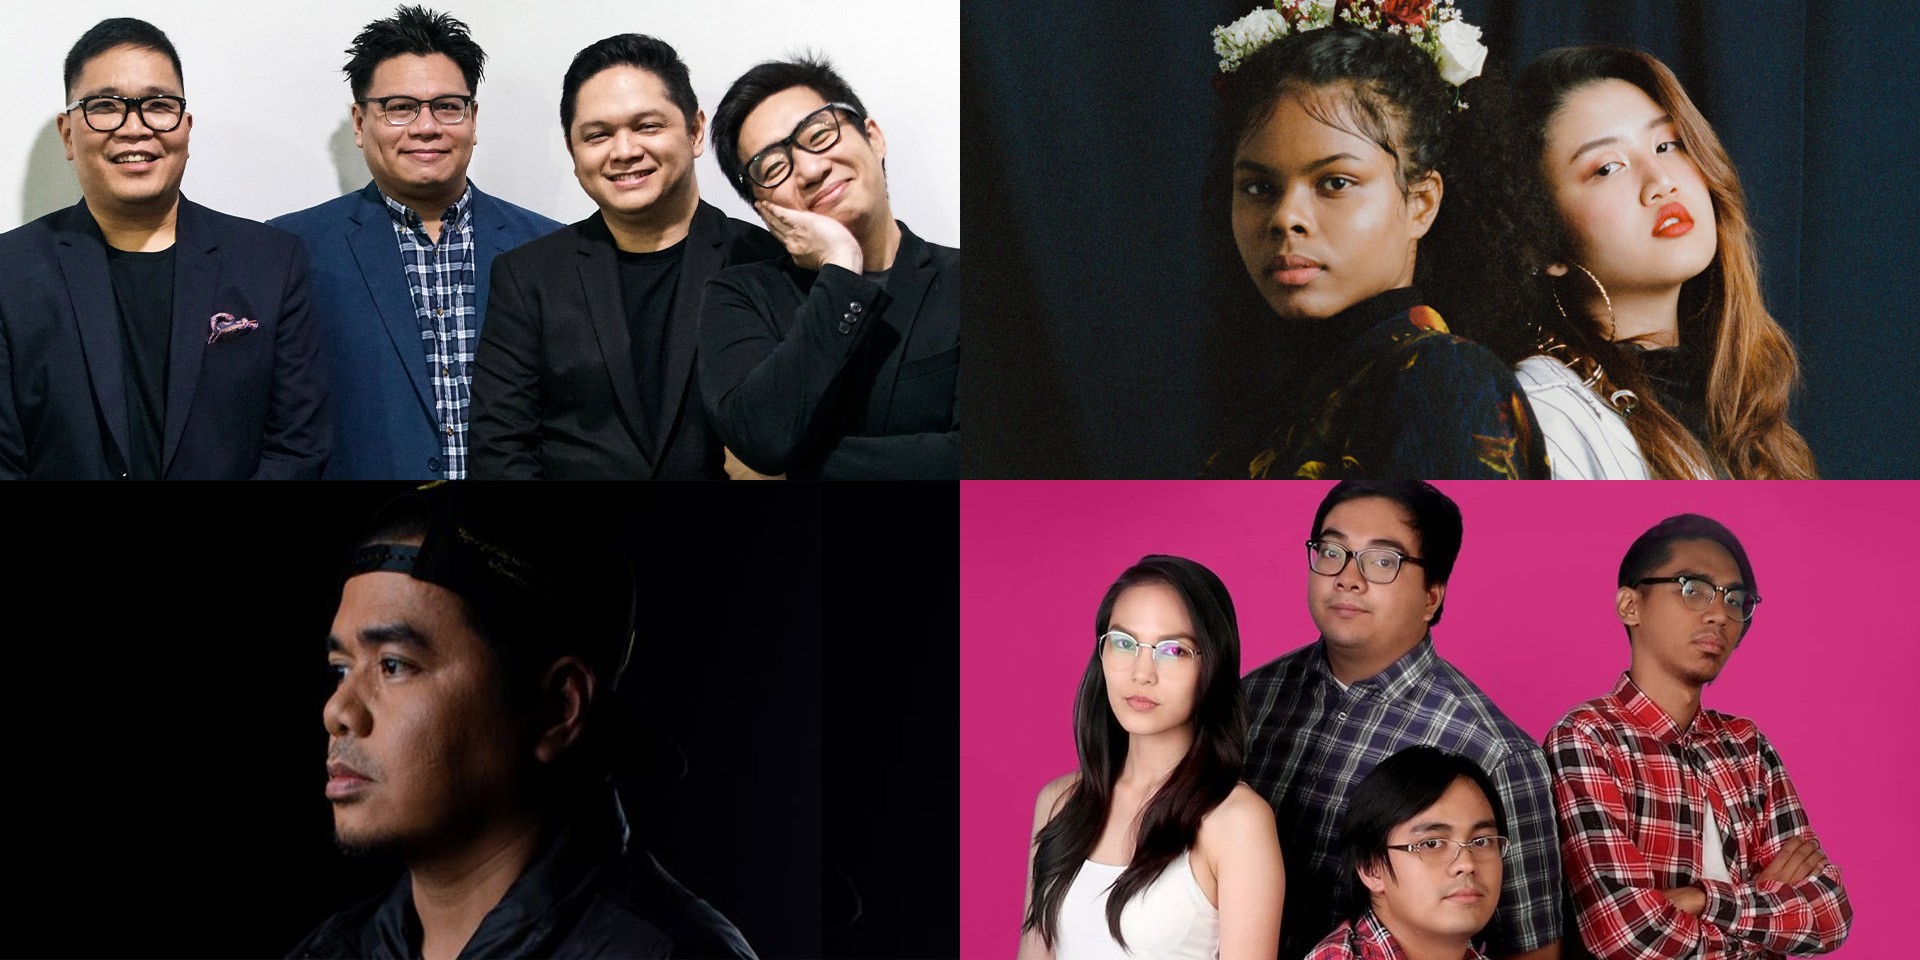 The Itchyworms, Gloc-9, allen&elle, Garage Morning, and more release new music – listen